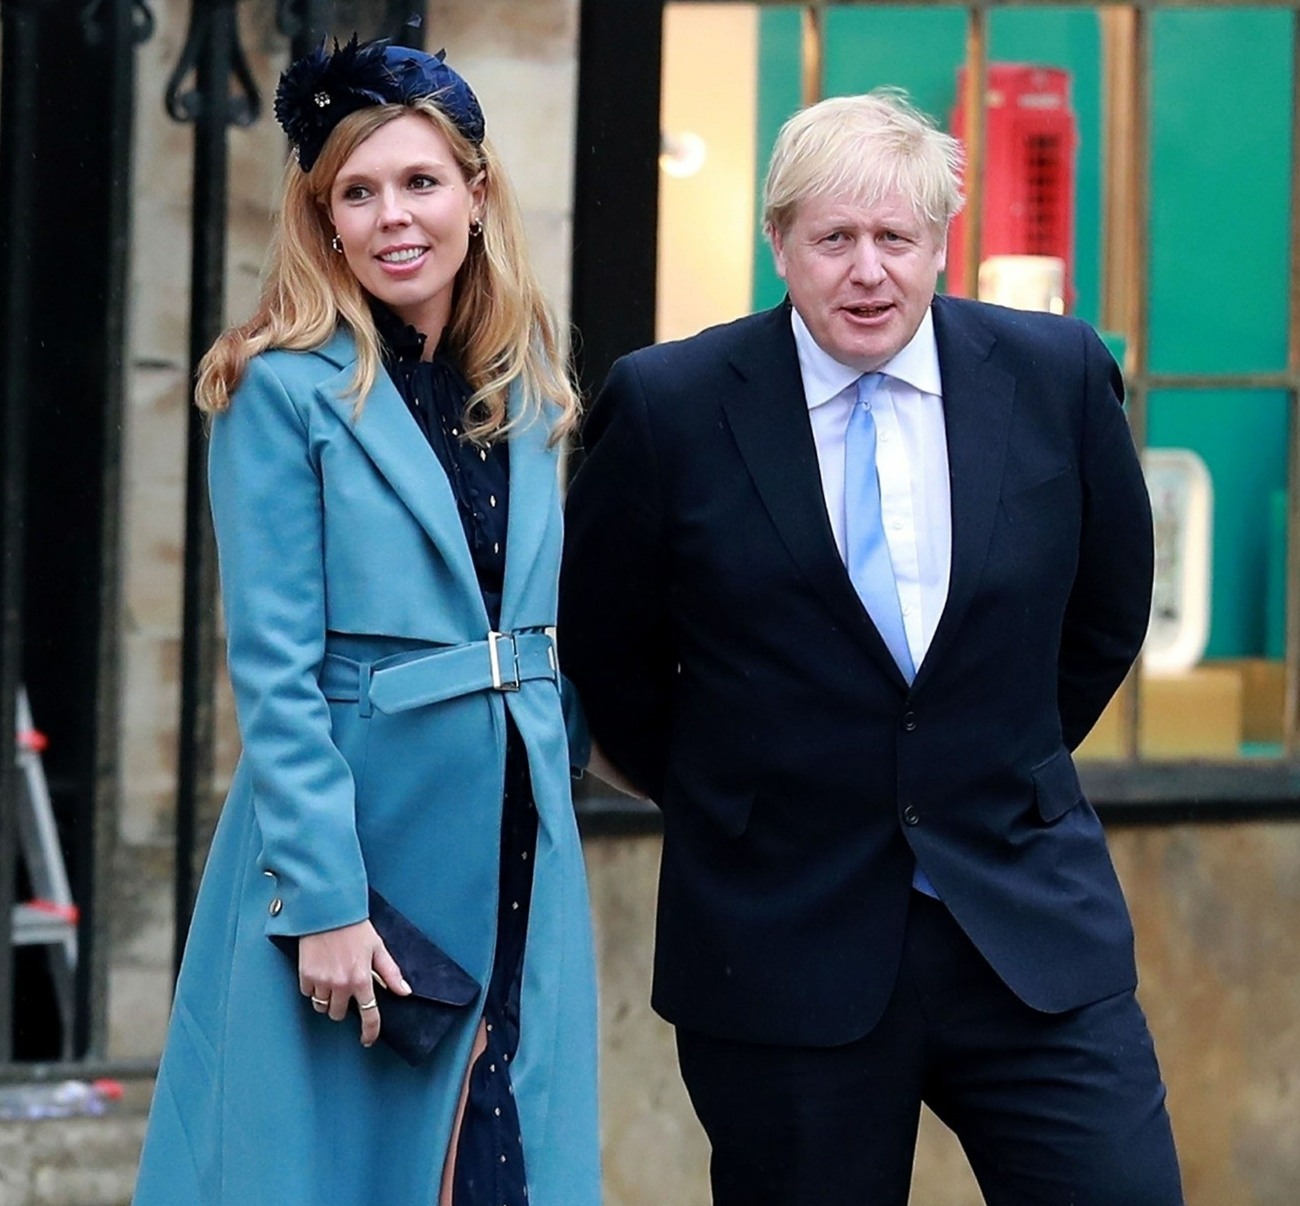 Boris Johnson and his pregnant fiancee Carrie Symonds are seen leaving Westminster Abbey